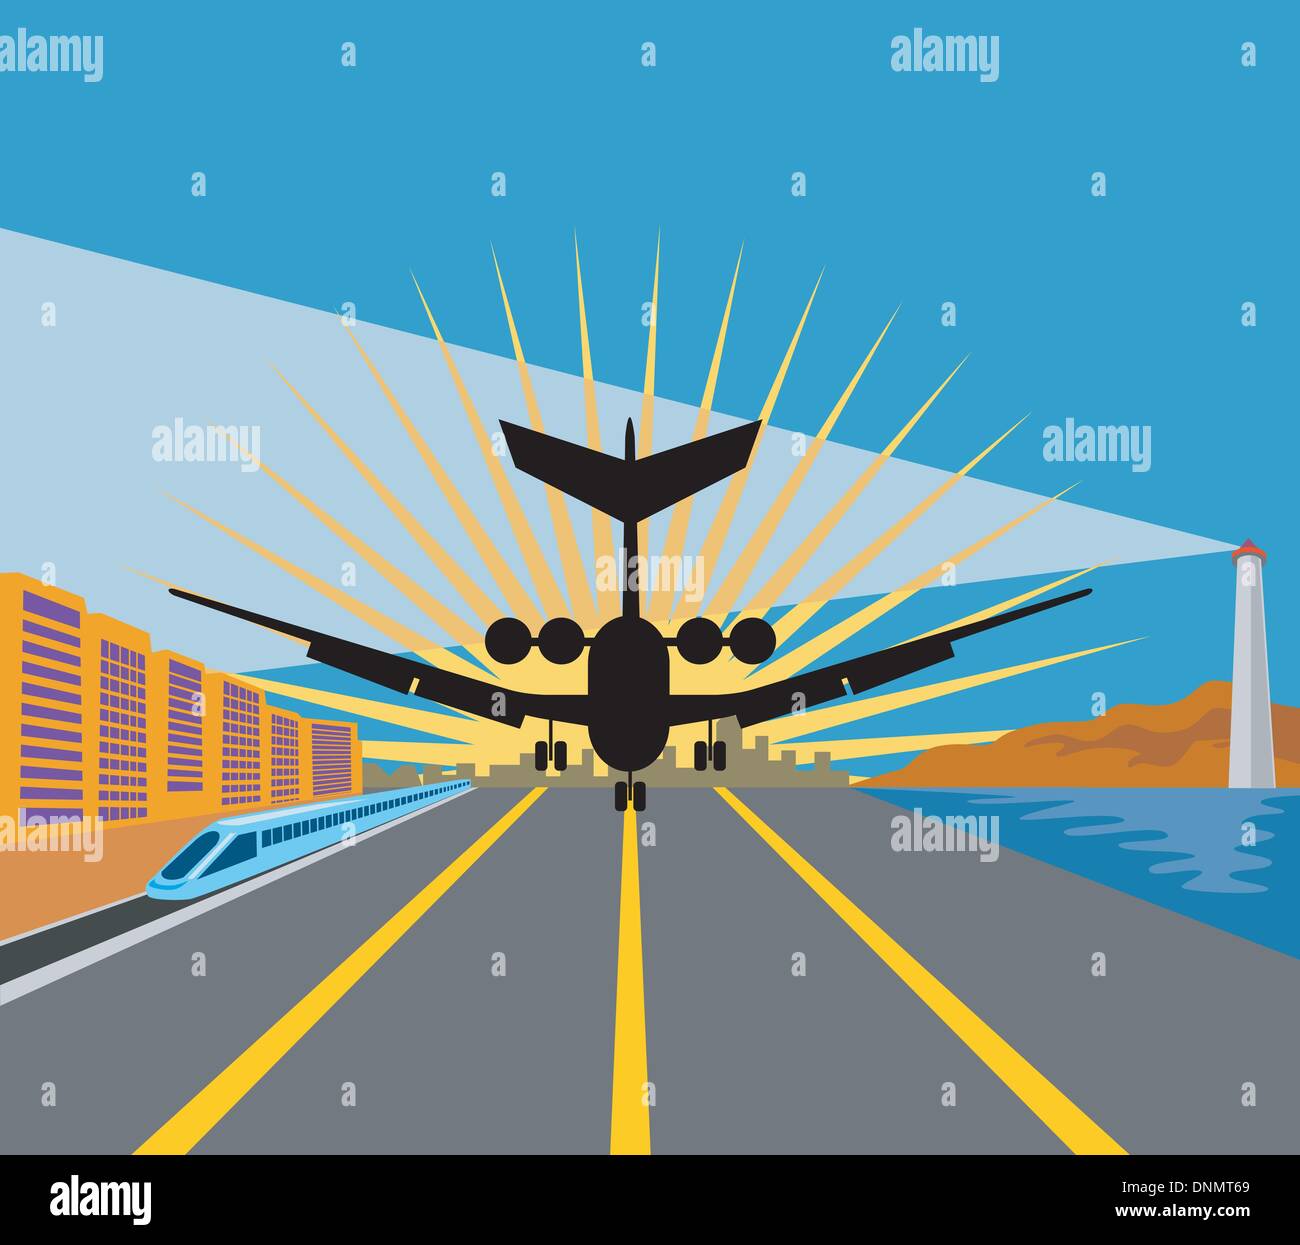 illustration of a commercial jet plane airliner taking off on runway airport with train and lighthouse isolated background Stock Vector